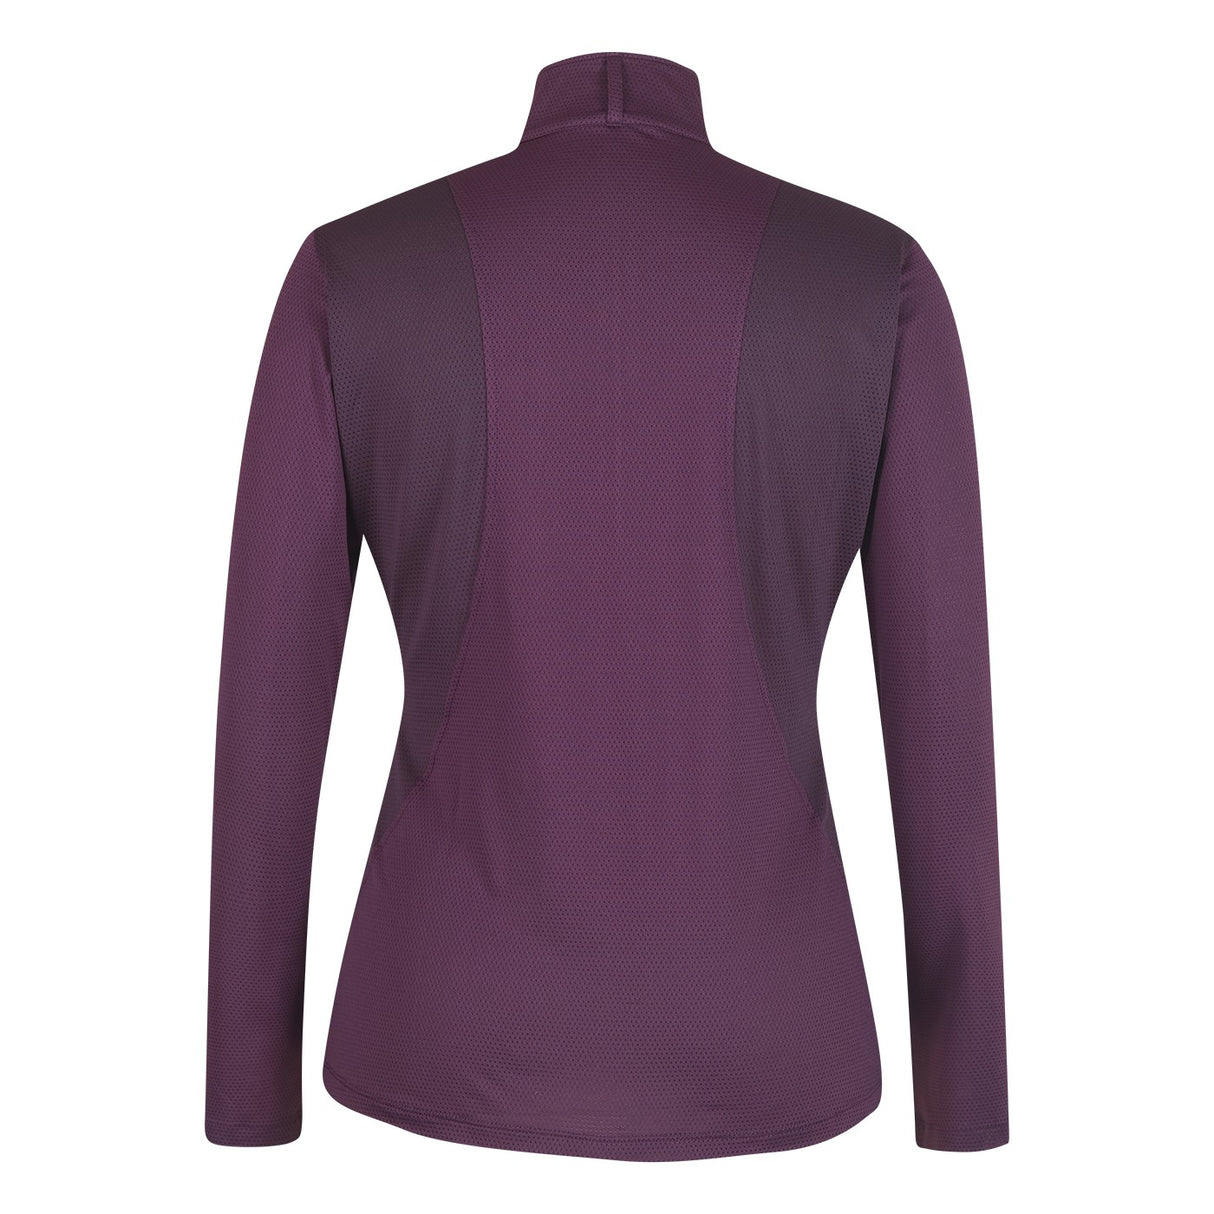 Kerrits Easy Stride Ice Fil Solide Chemise à manches longues